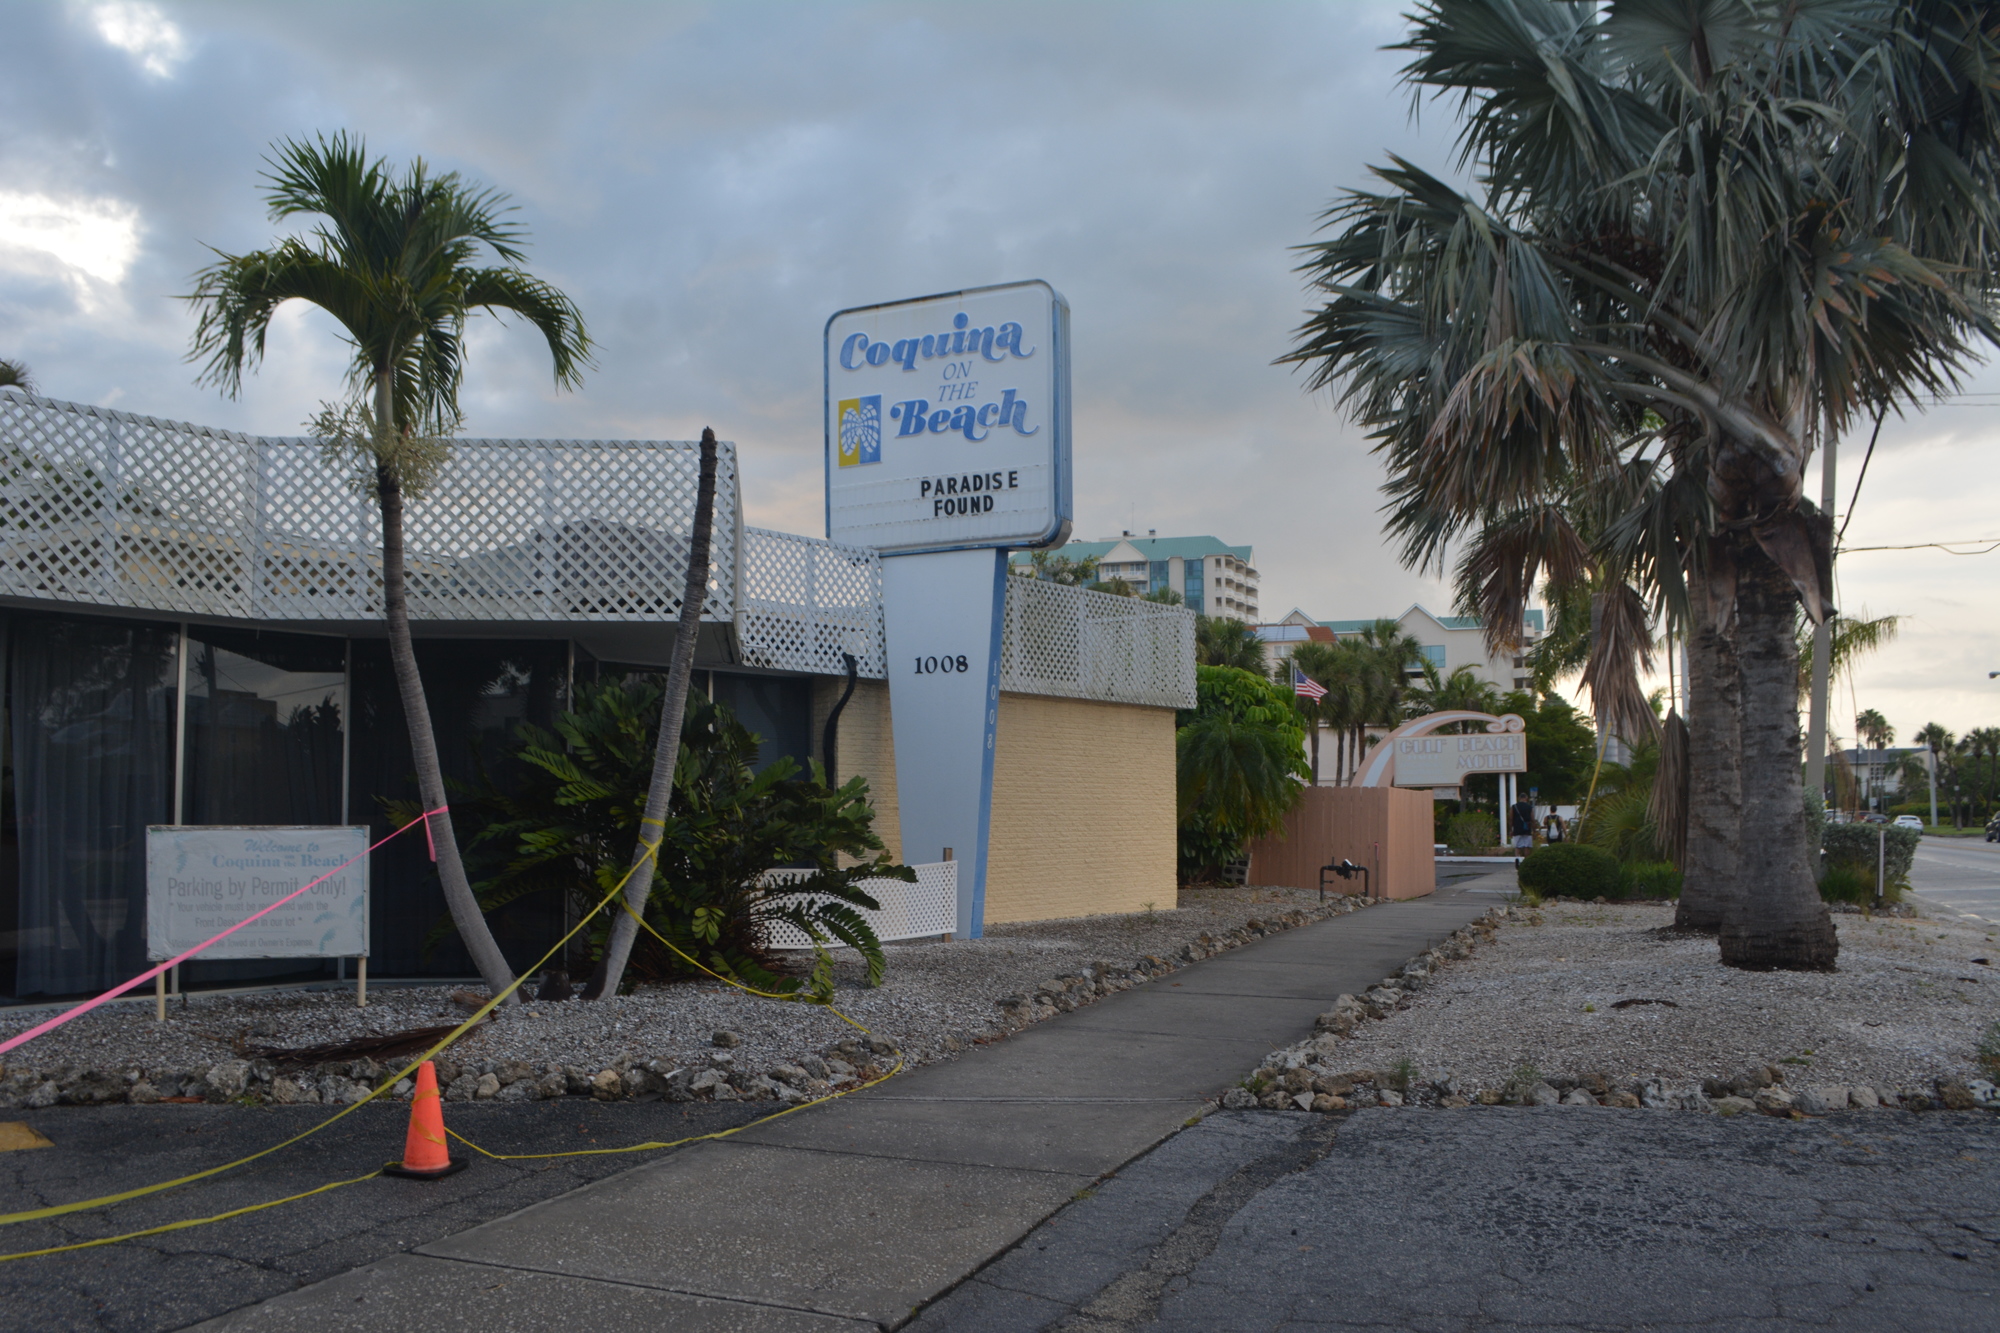 The condo project would replace two existing hotel buildings on Lido Key.